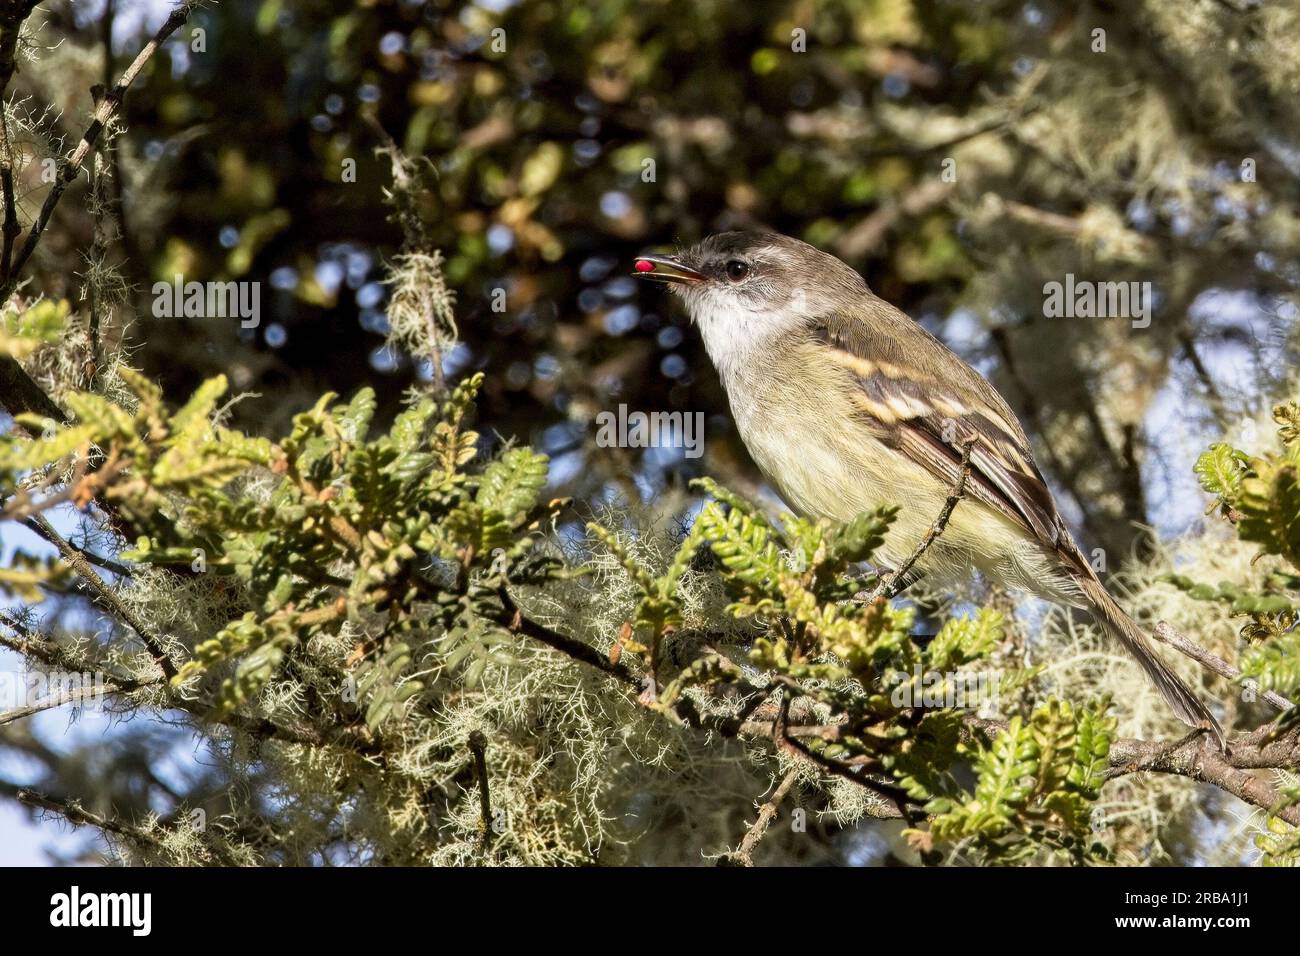 White-throated Tyrannulet (Mecocerculus leucophrys) perched in a tree, near Bogota, Colombia. Stock Photo